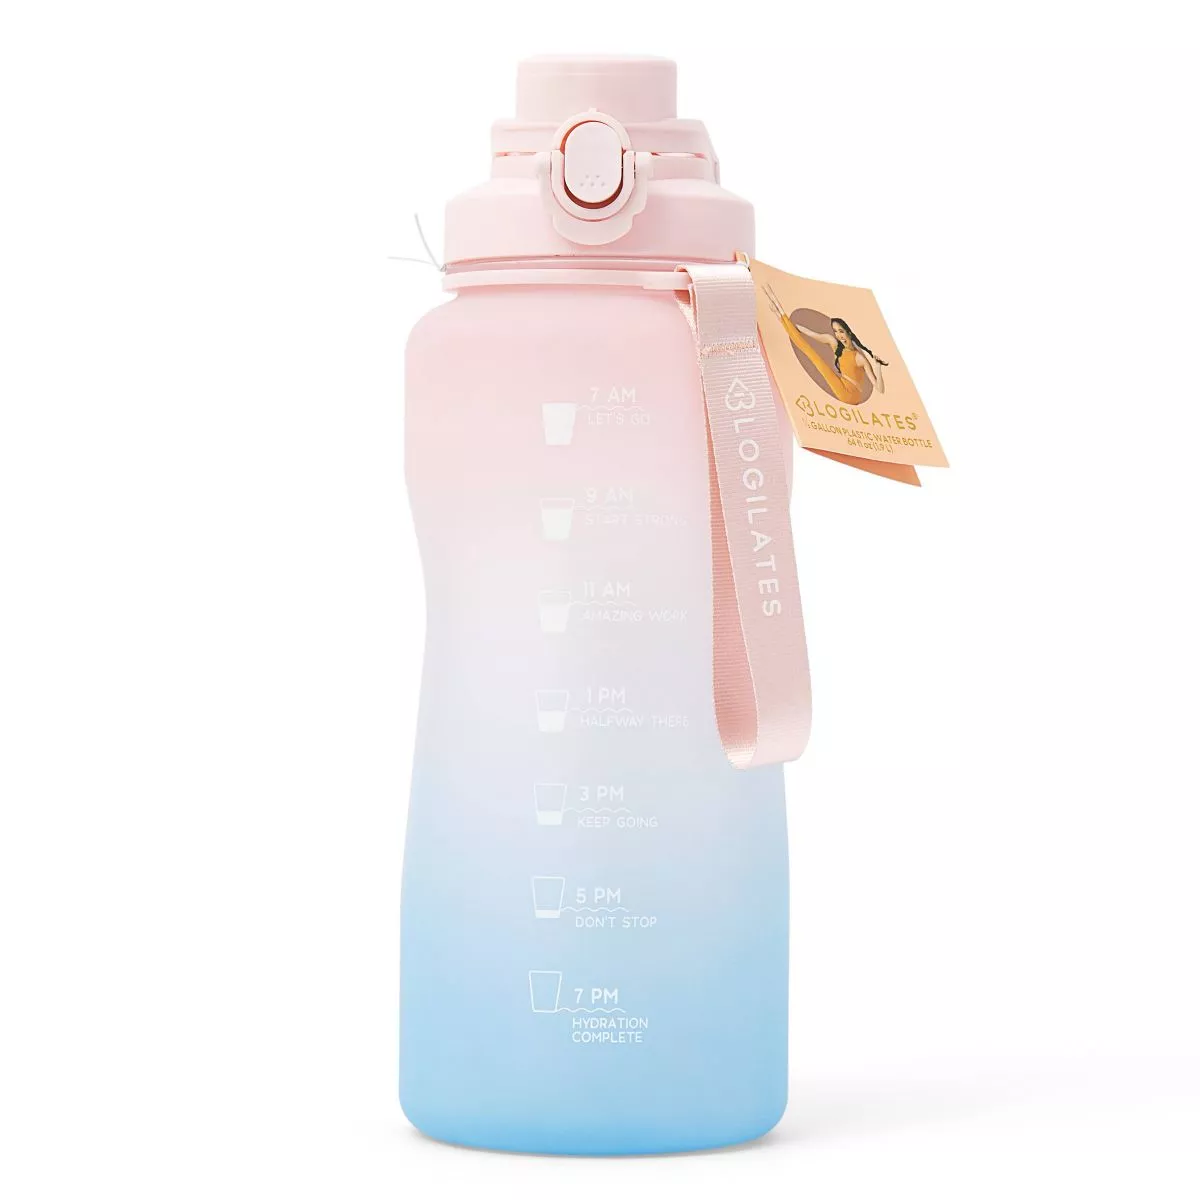 I'm so toxic I had to have this new @blogilates water bottle sling